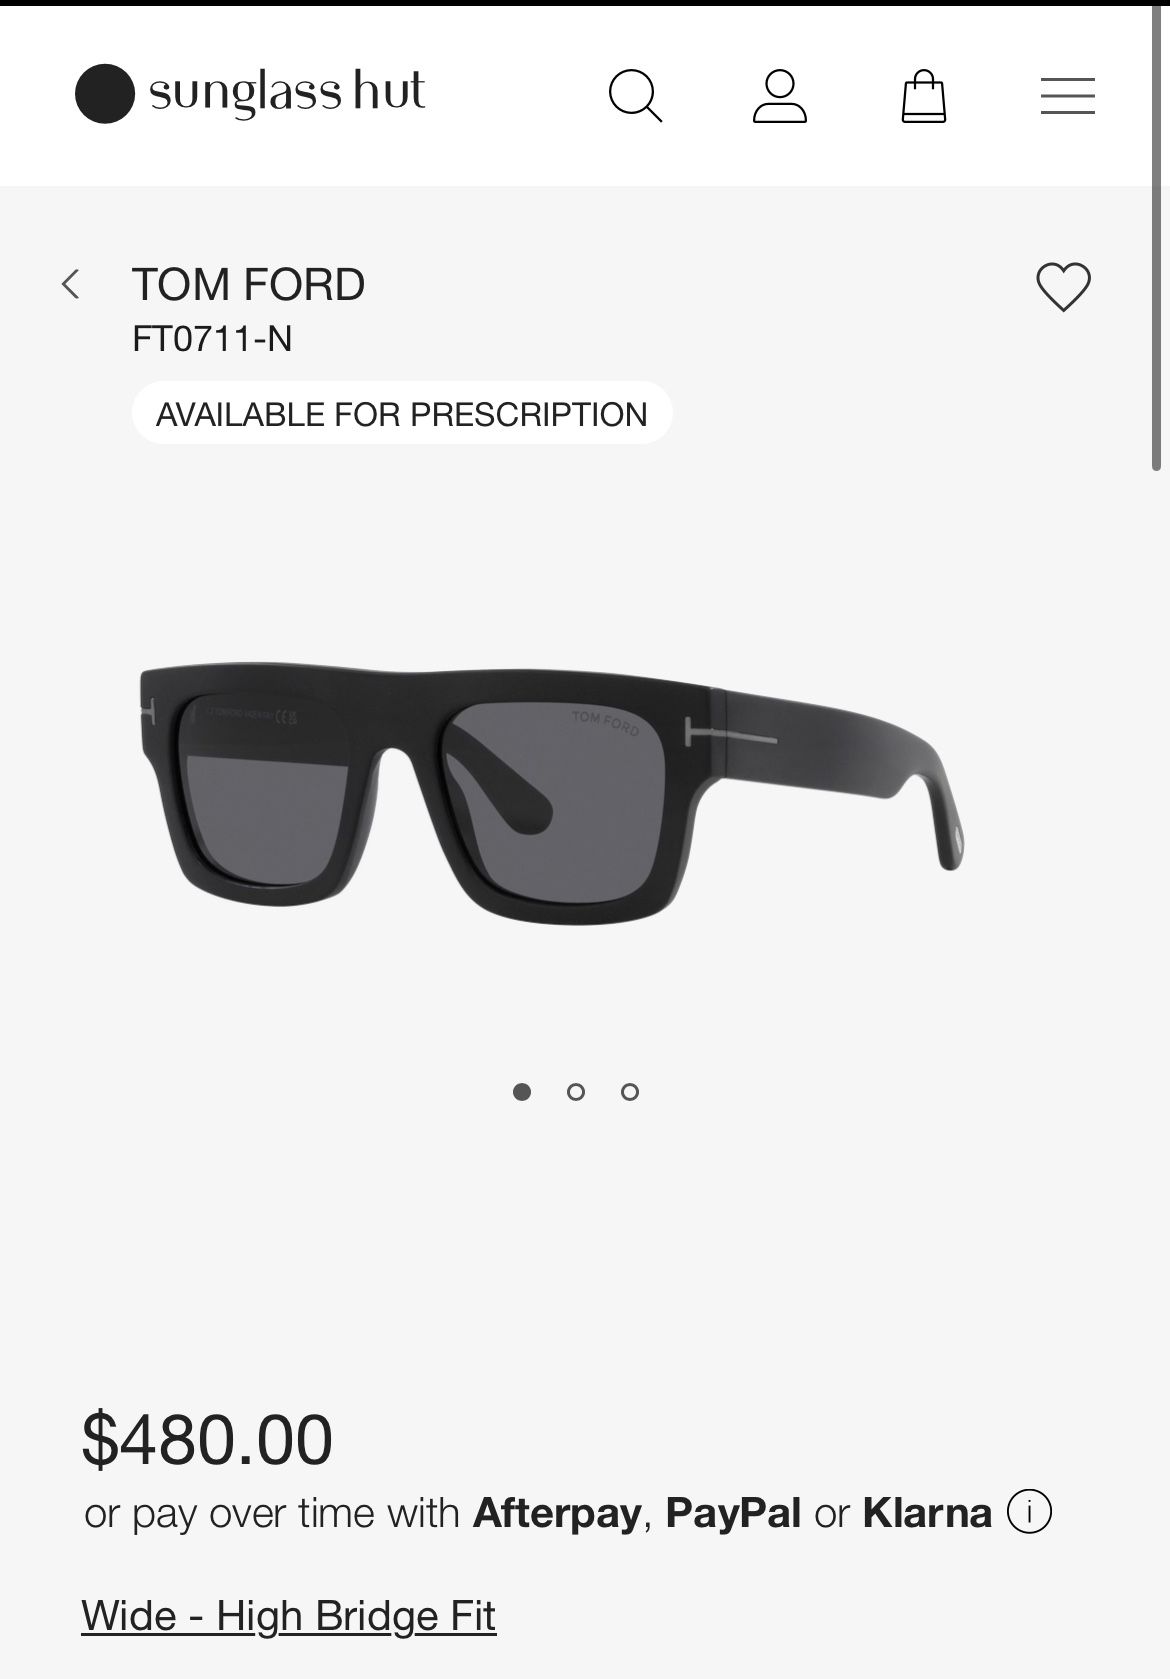 tom ford fausto for man